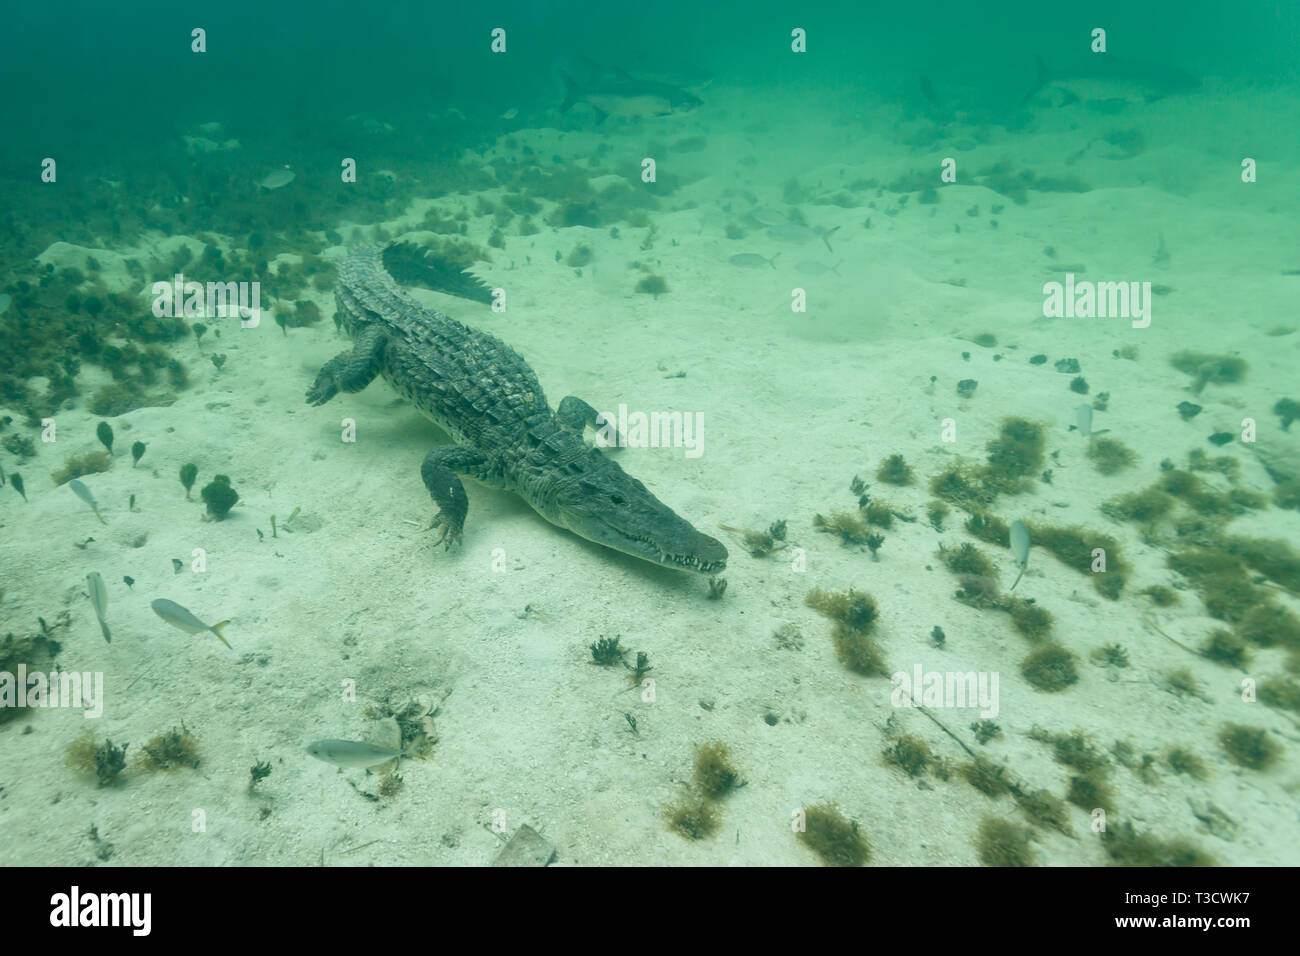 Closeup of top view of an American crocodile, Crocodylus acutus, jaw closed, swimming after a fish Stock Photo